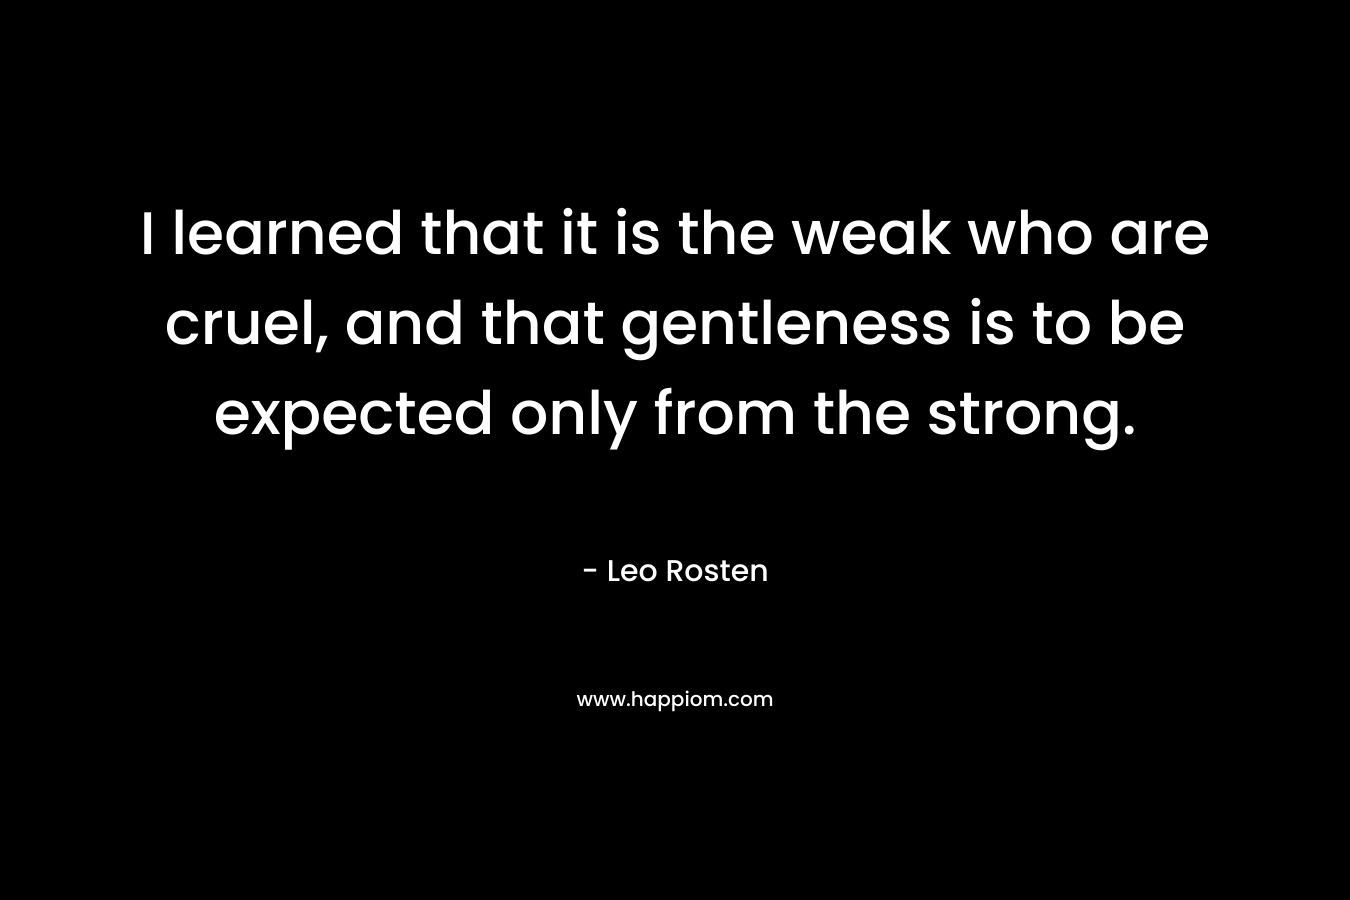 I learned that it is the weak who are cruel, and that gentleness is to be expected only from the strong. – Leo Rosten